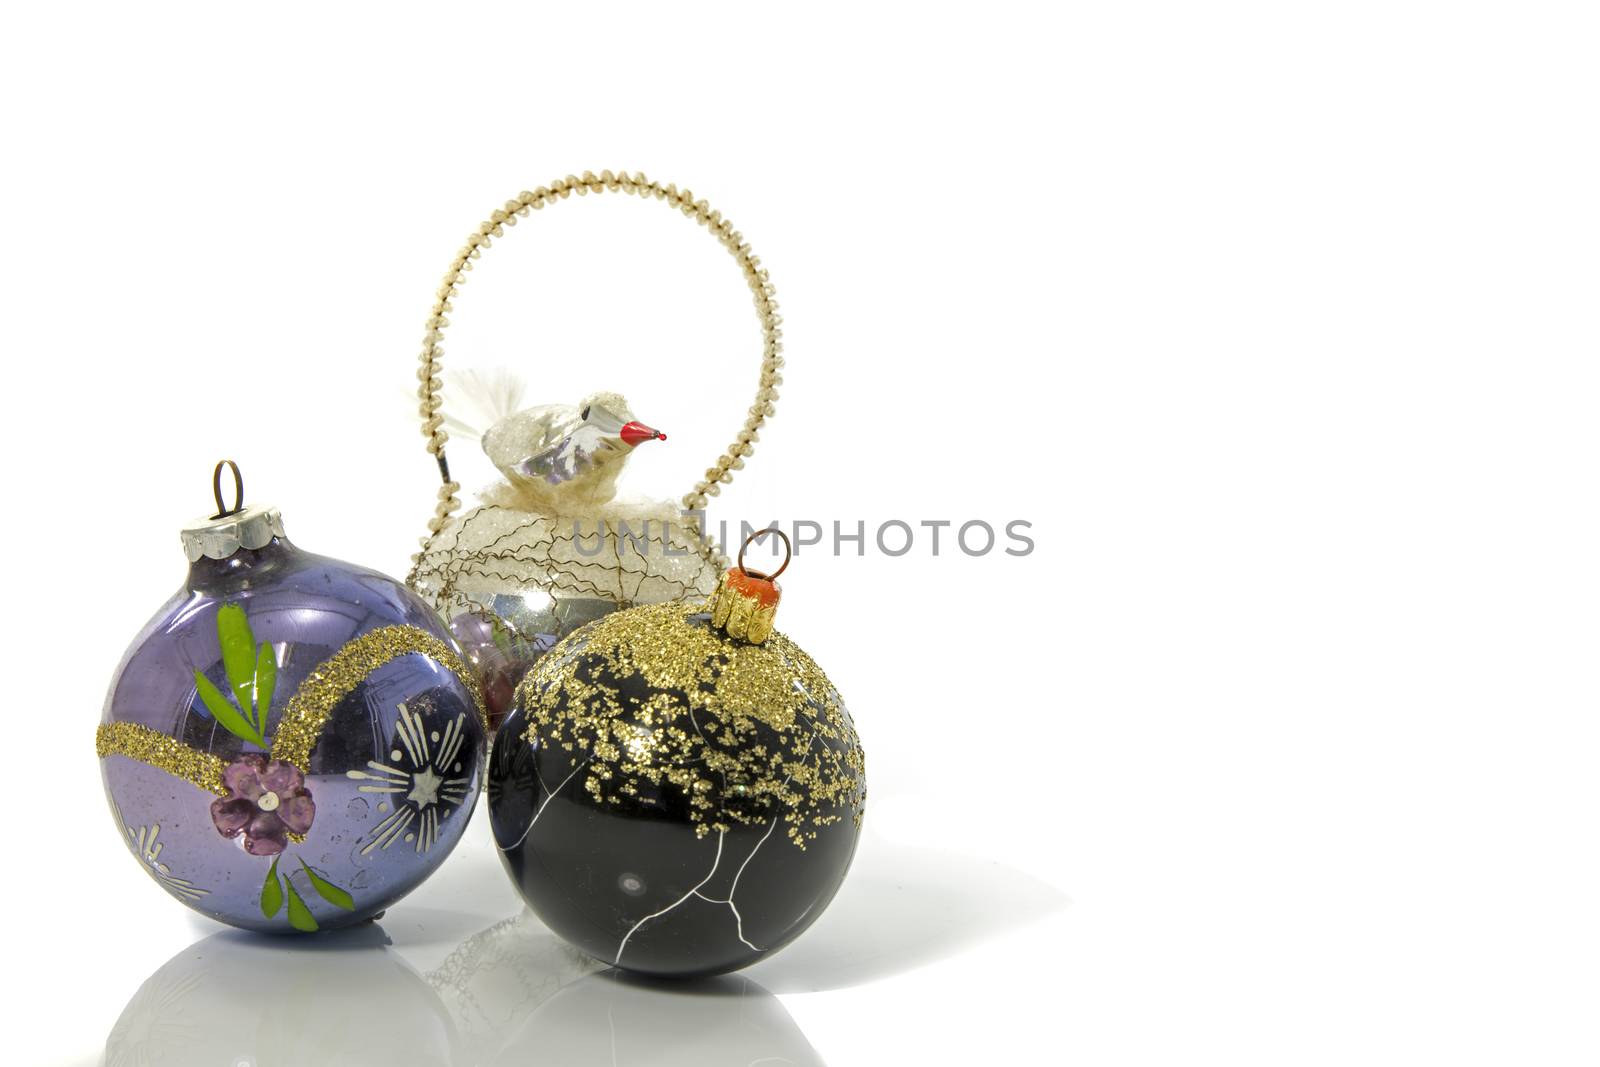 old vintage baubles for the christmas tree  by compuinfoto